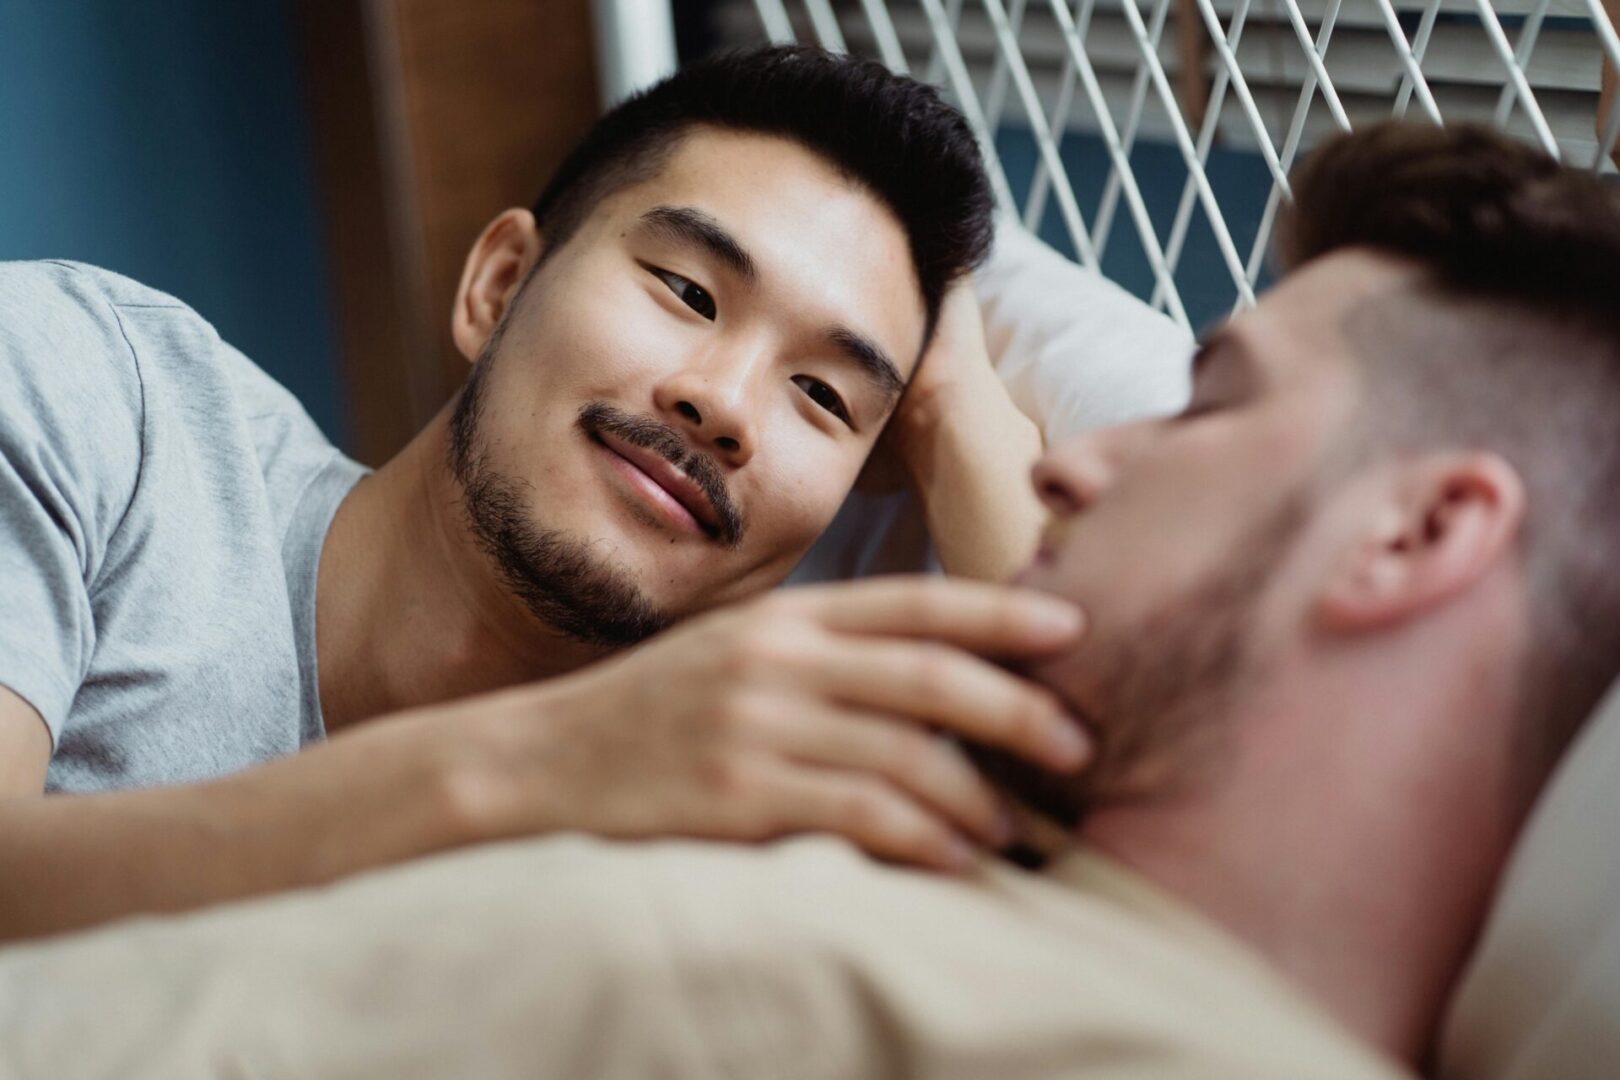 A man laying on the bed with another man.